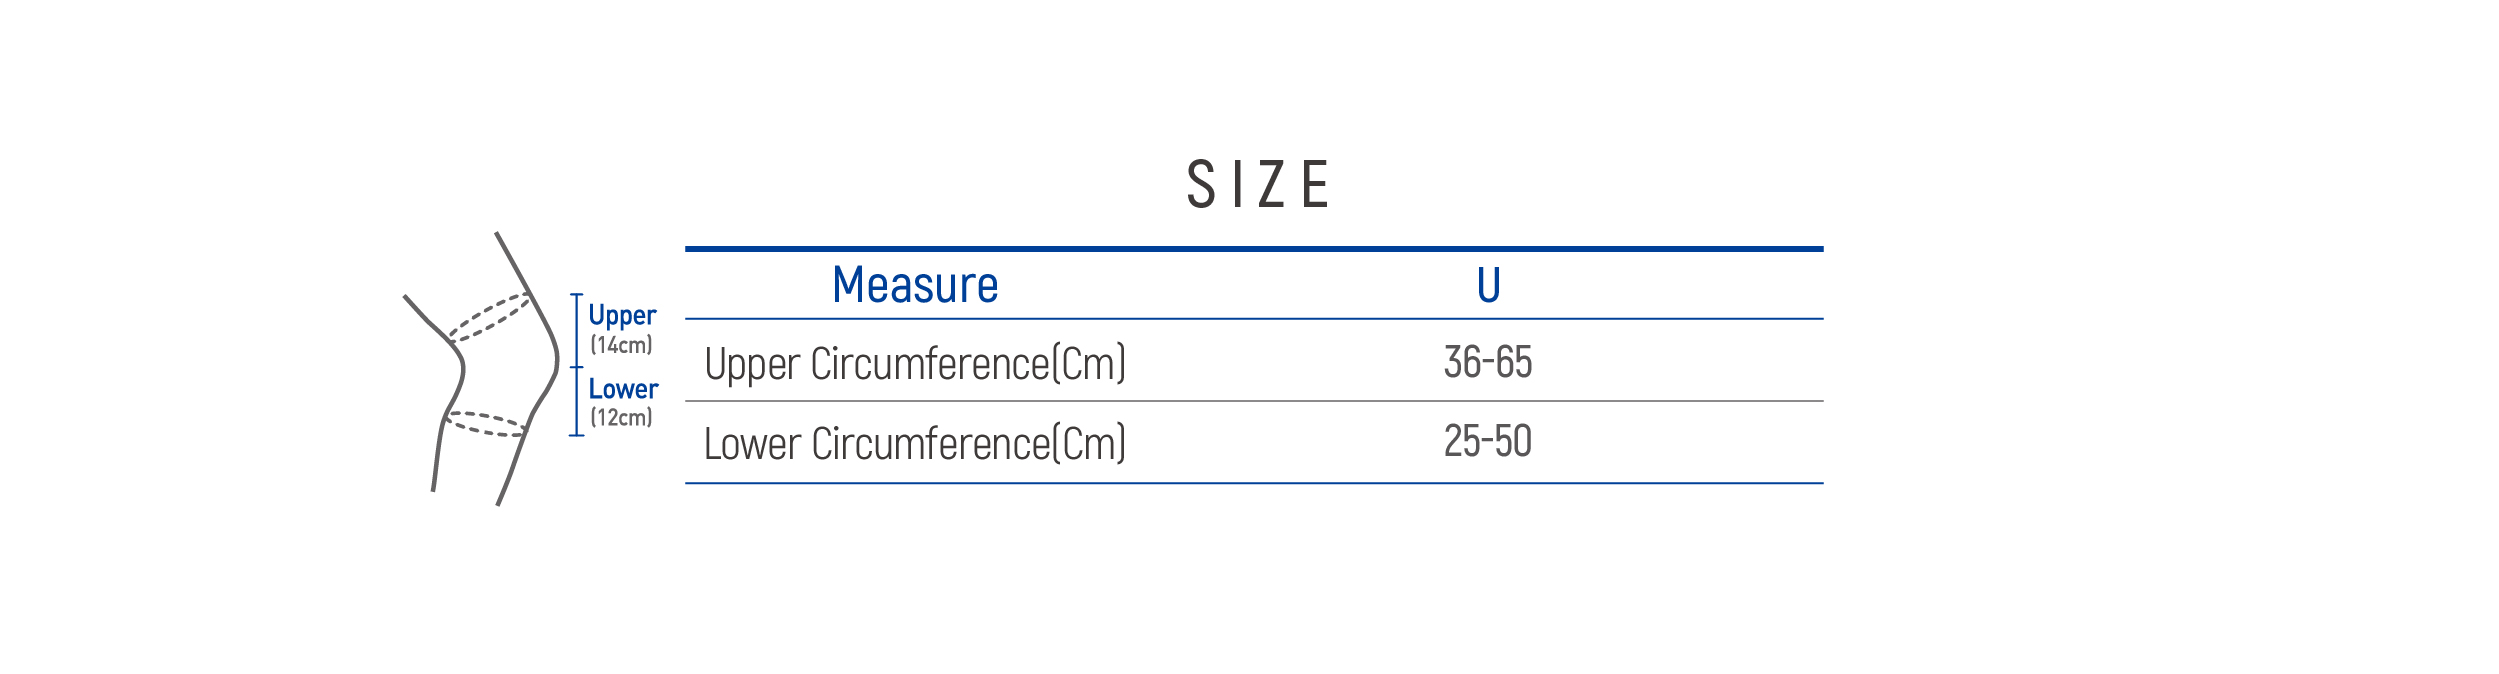 DR-902 Size table image